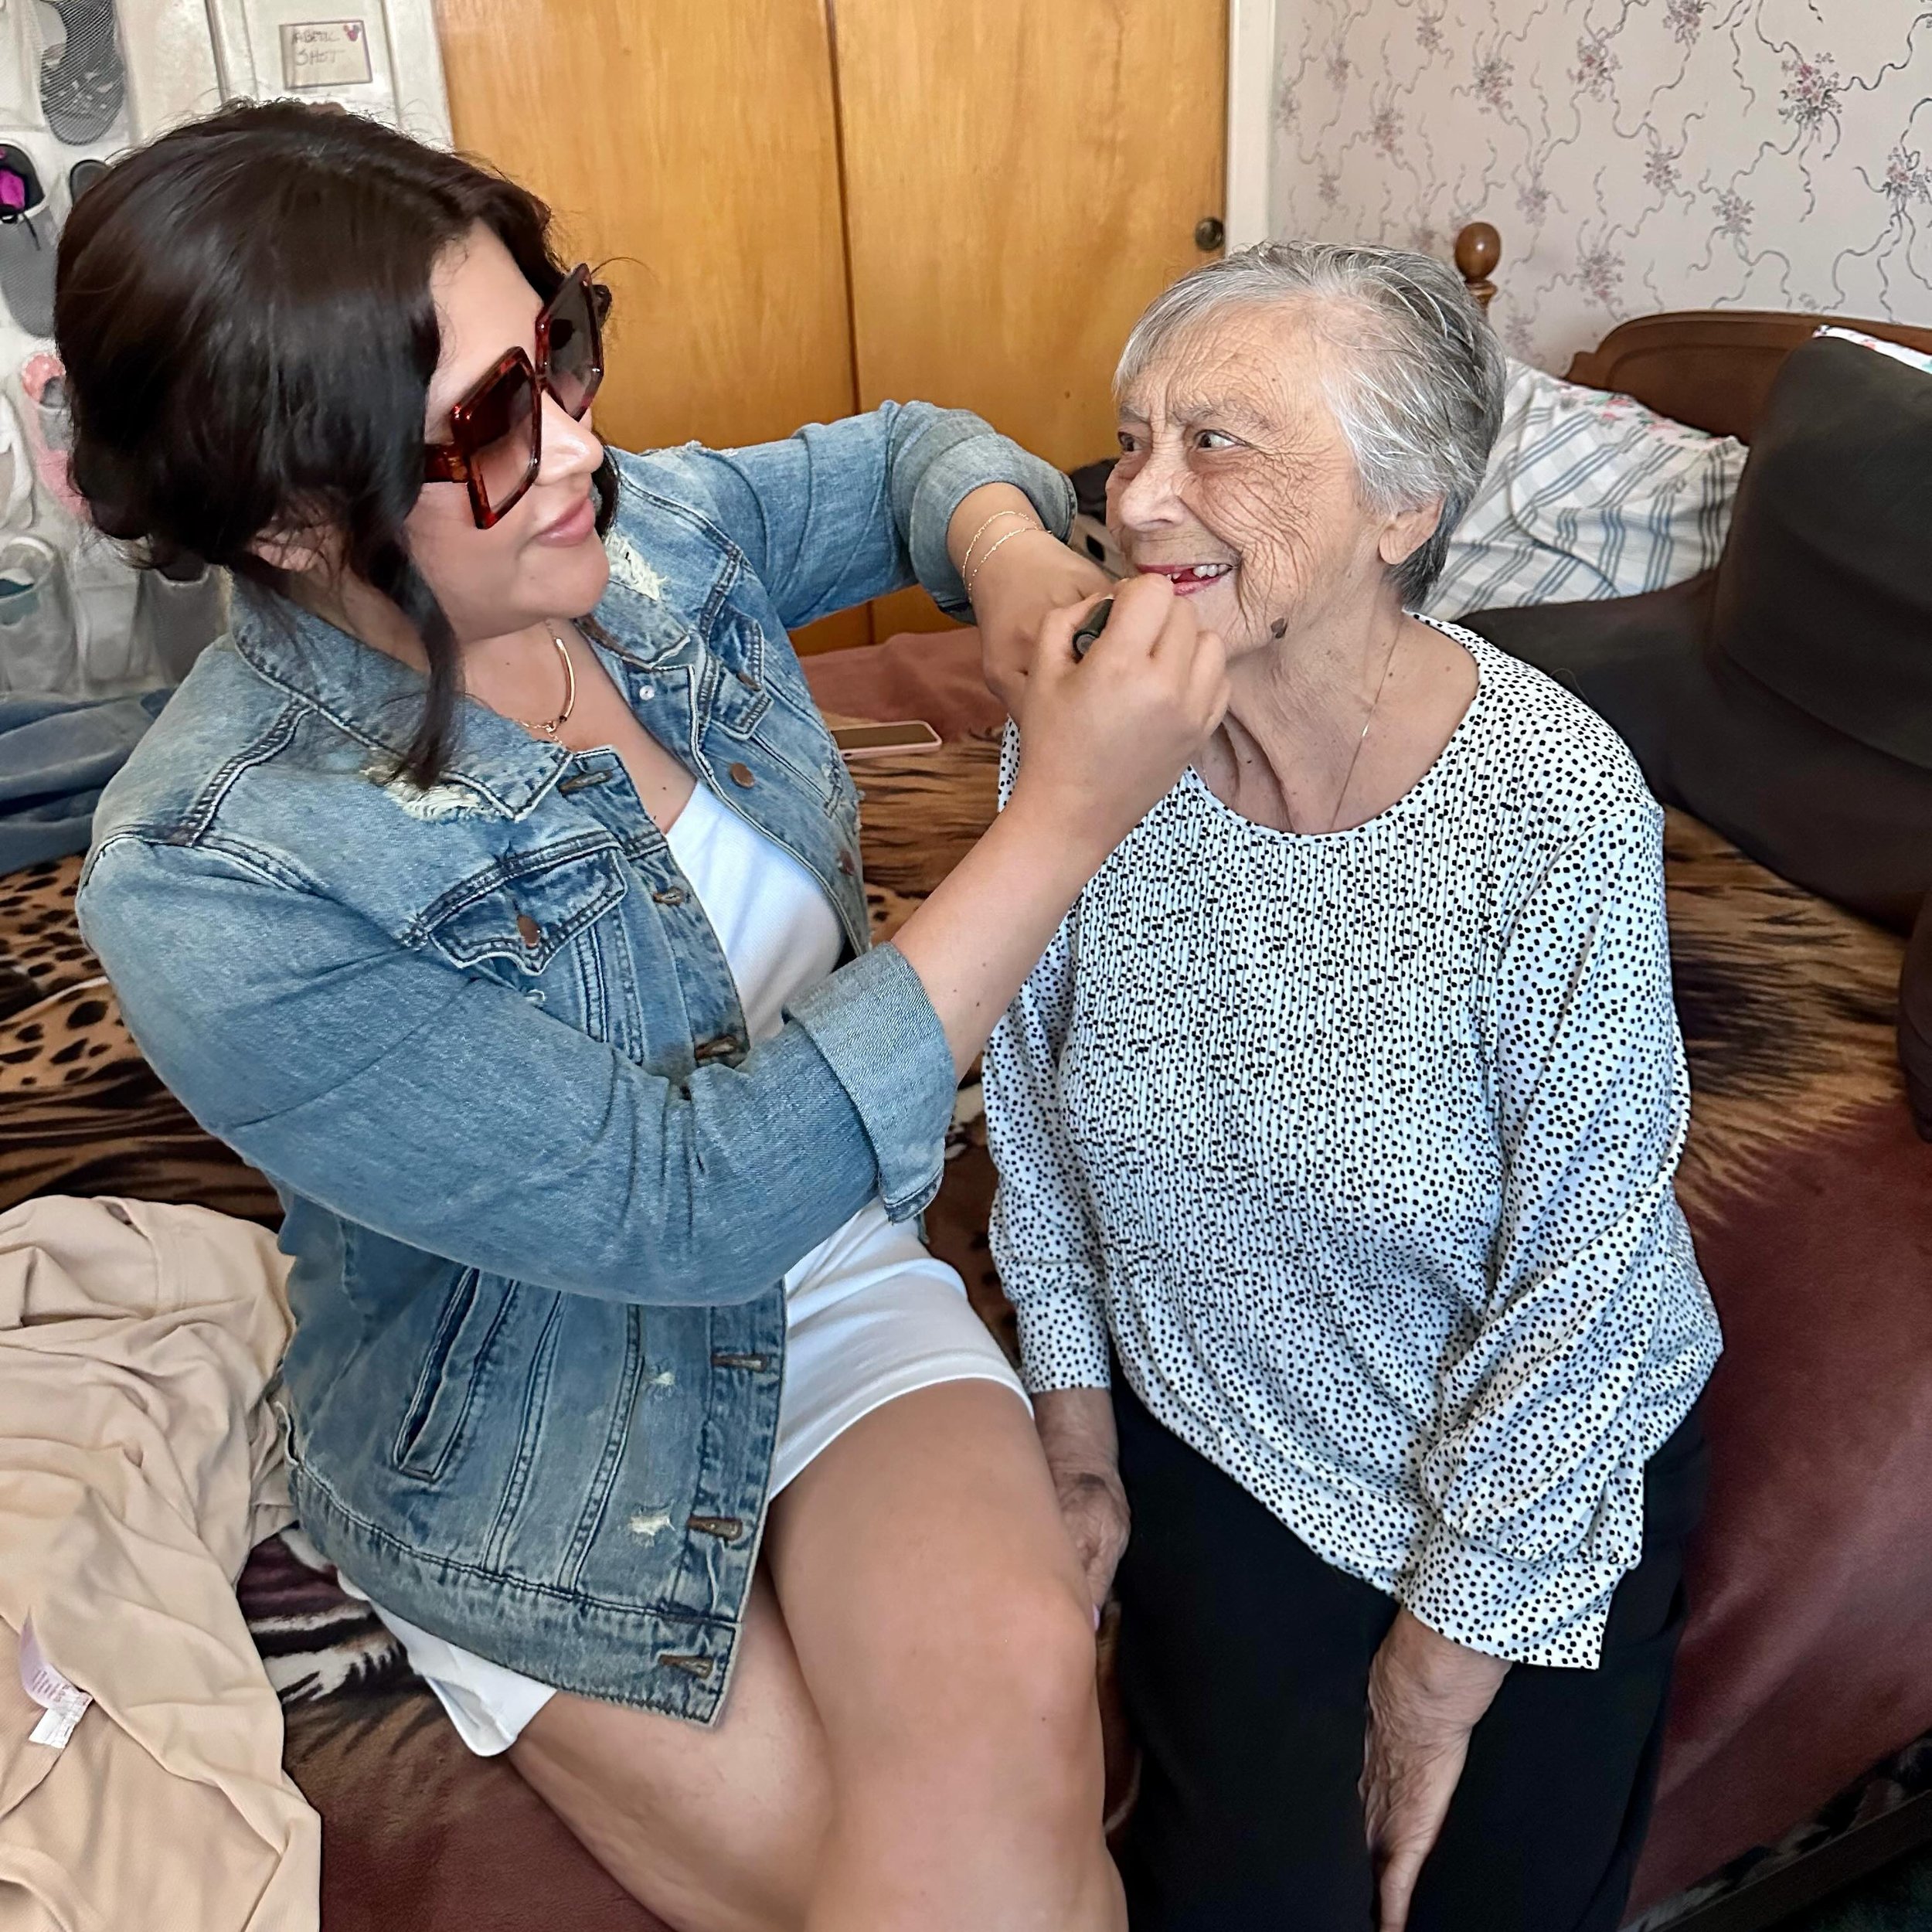 This is 90.

I flew to LA for Mothers Day to have one last gathering in the home my grandparents have lived in for 63 years.

I was not prepared for the weight of this moment, I might blog about it when I can more eloquently put my thoughts together.